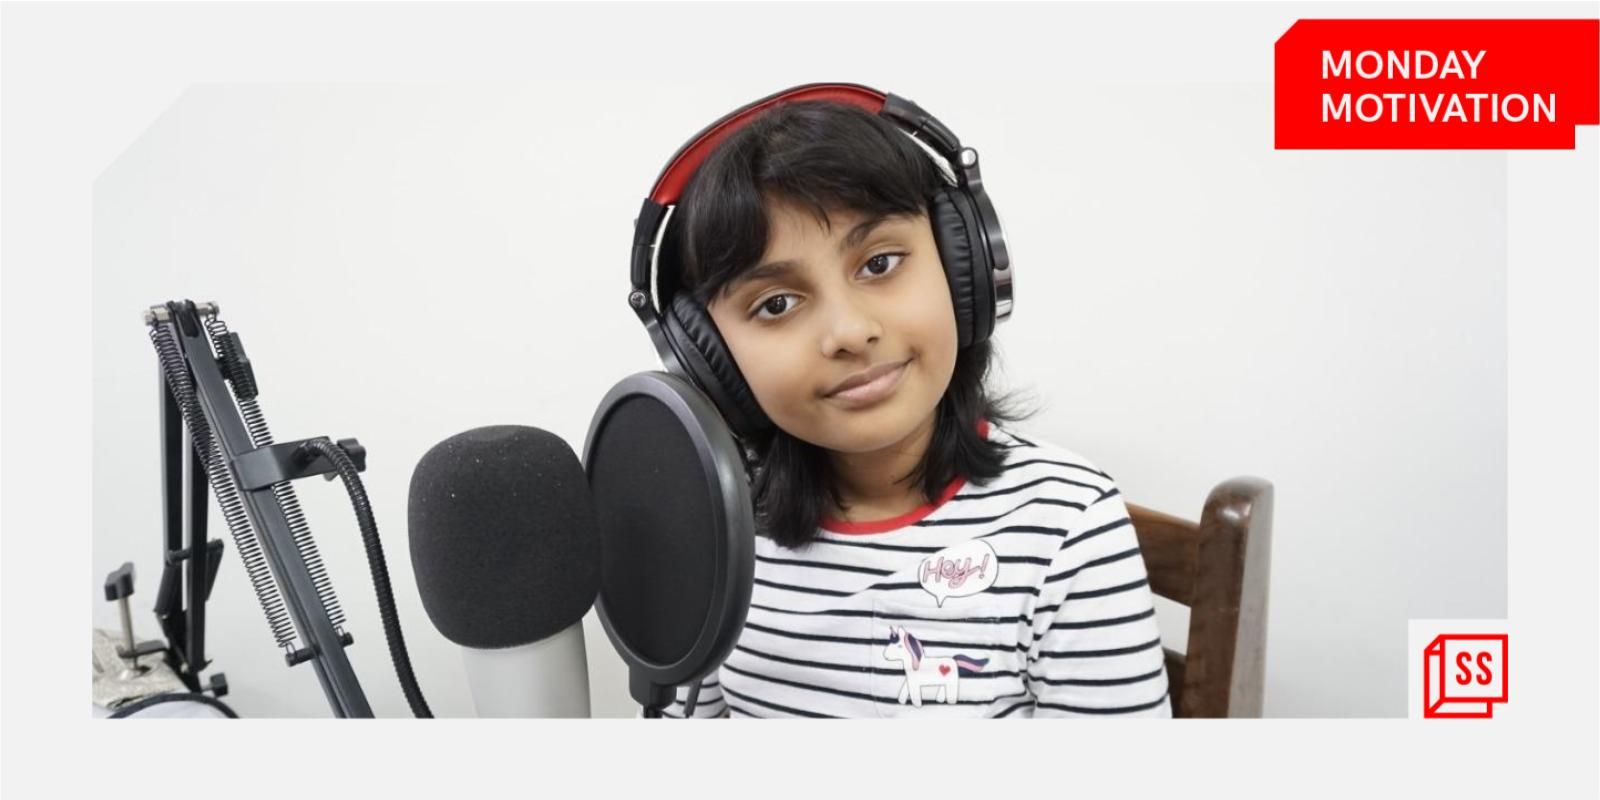 [Monday Motivation] This 10-year old is creating awareness about plastic pollution among children through her podcasts